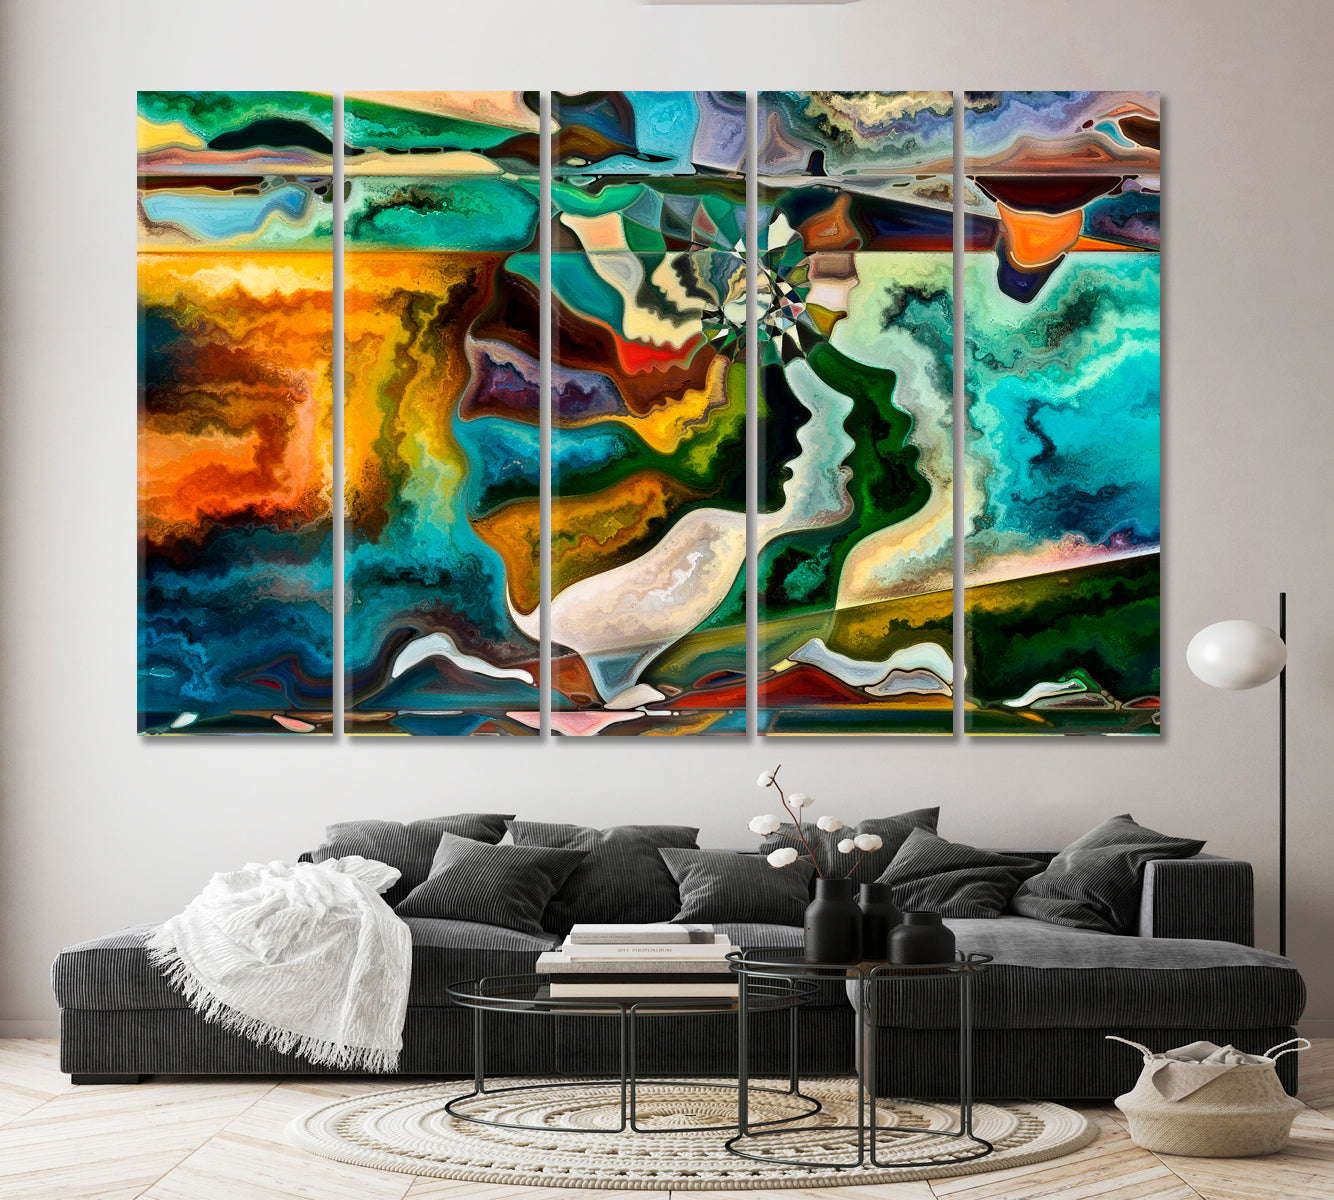 INTERWEAVING FLOW Inner World People and Forms Abstract Art Print Artesty 5 panels 36" x 24" 